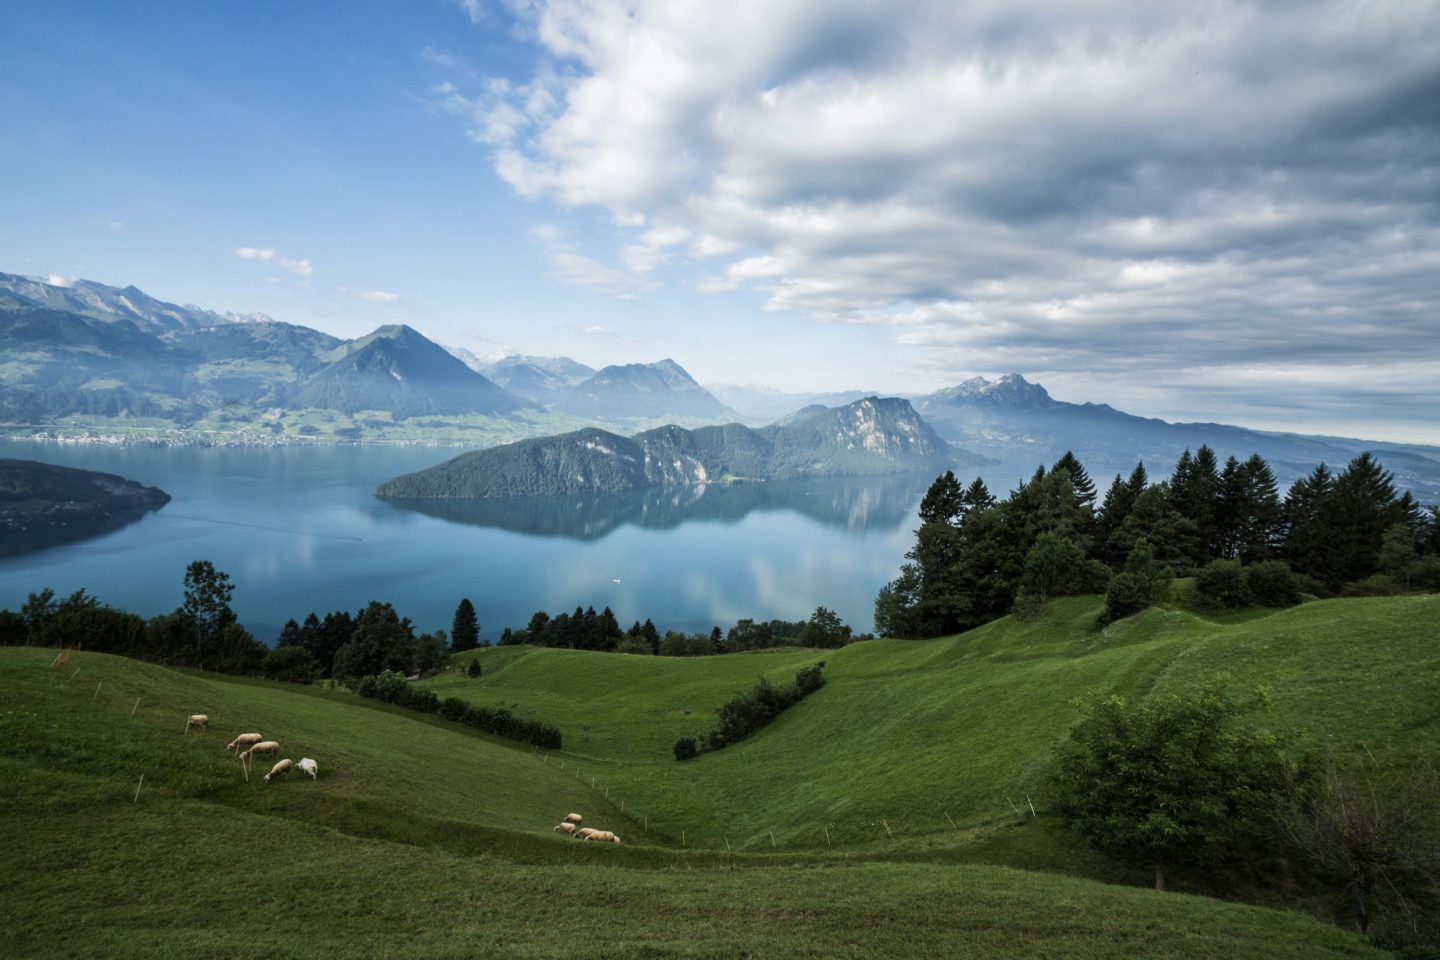 View of Lake Lucerne and the Alps during the ride up the Rigi.